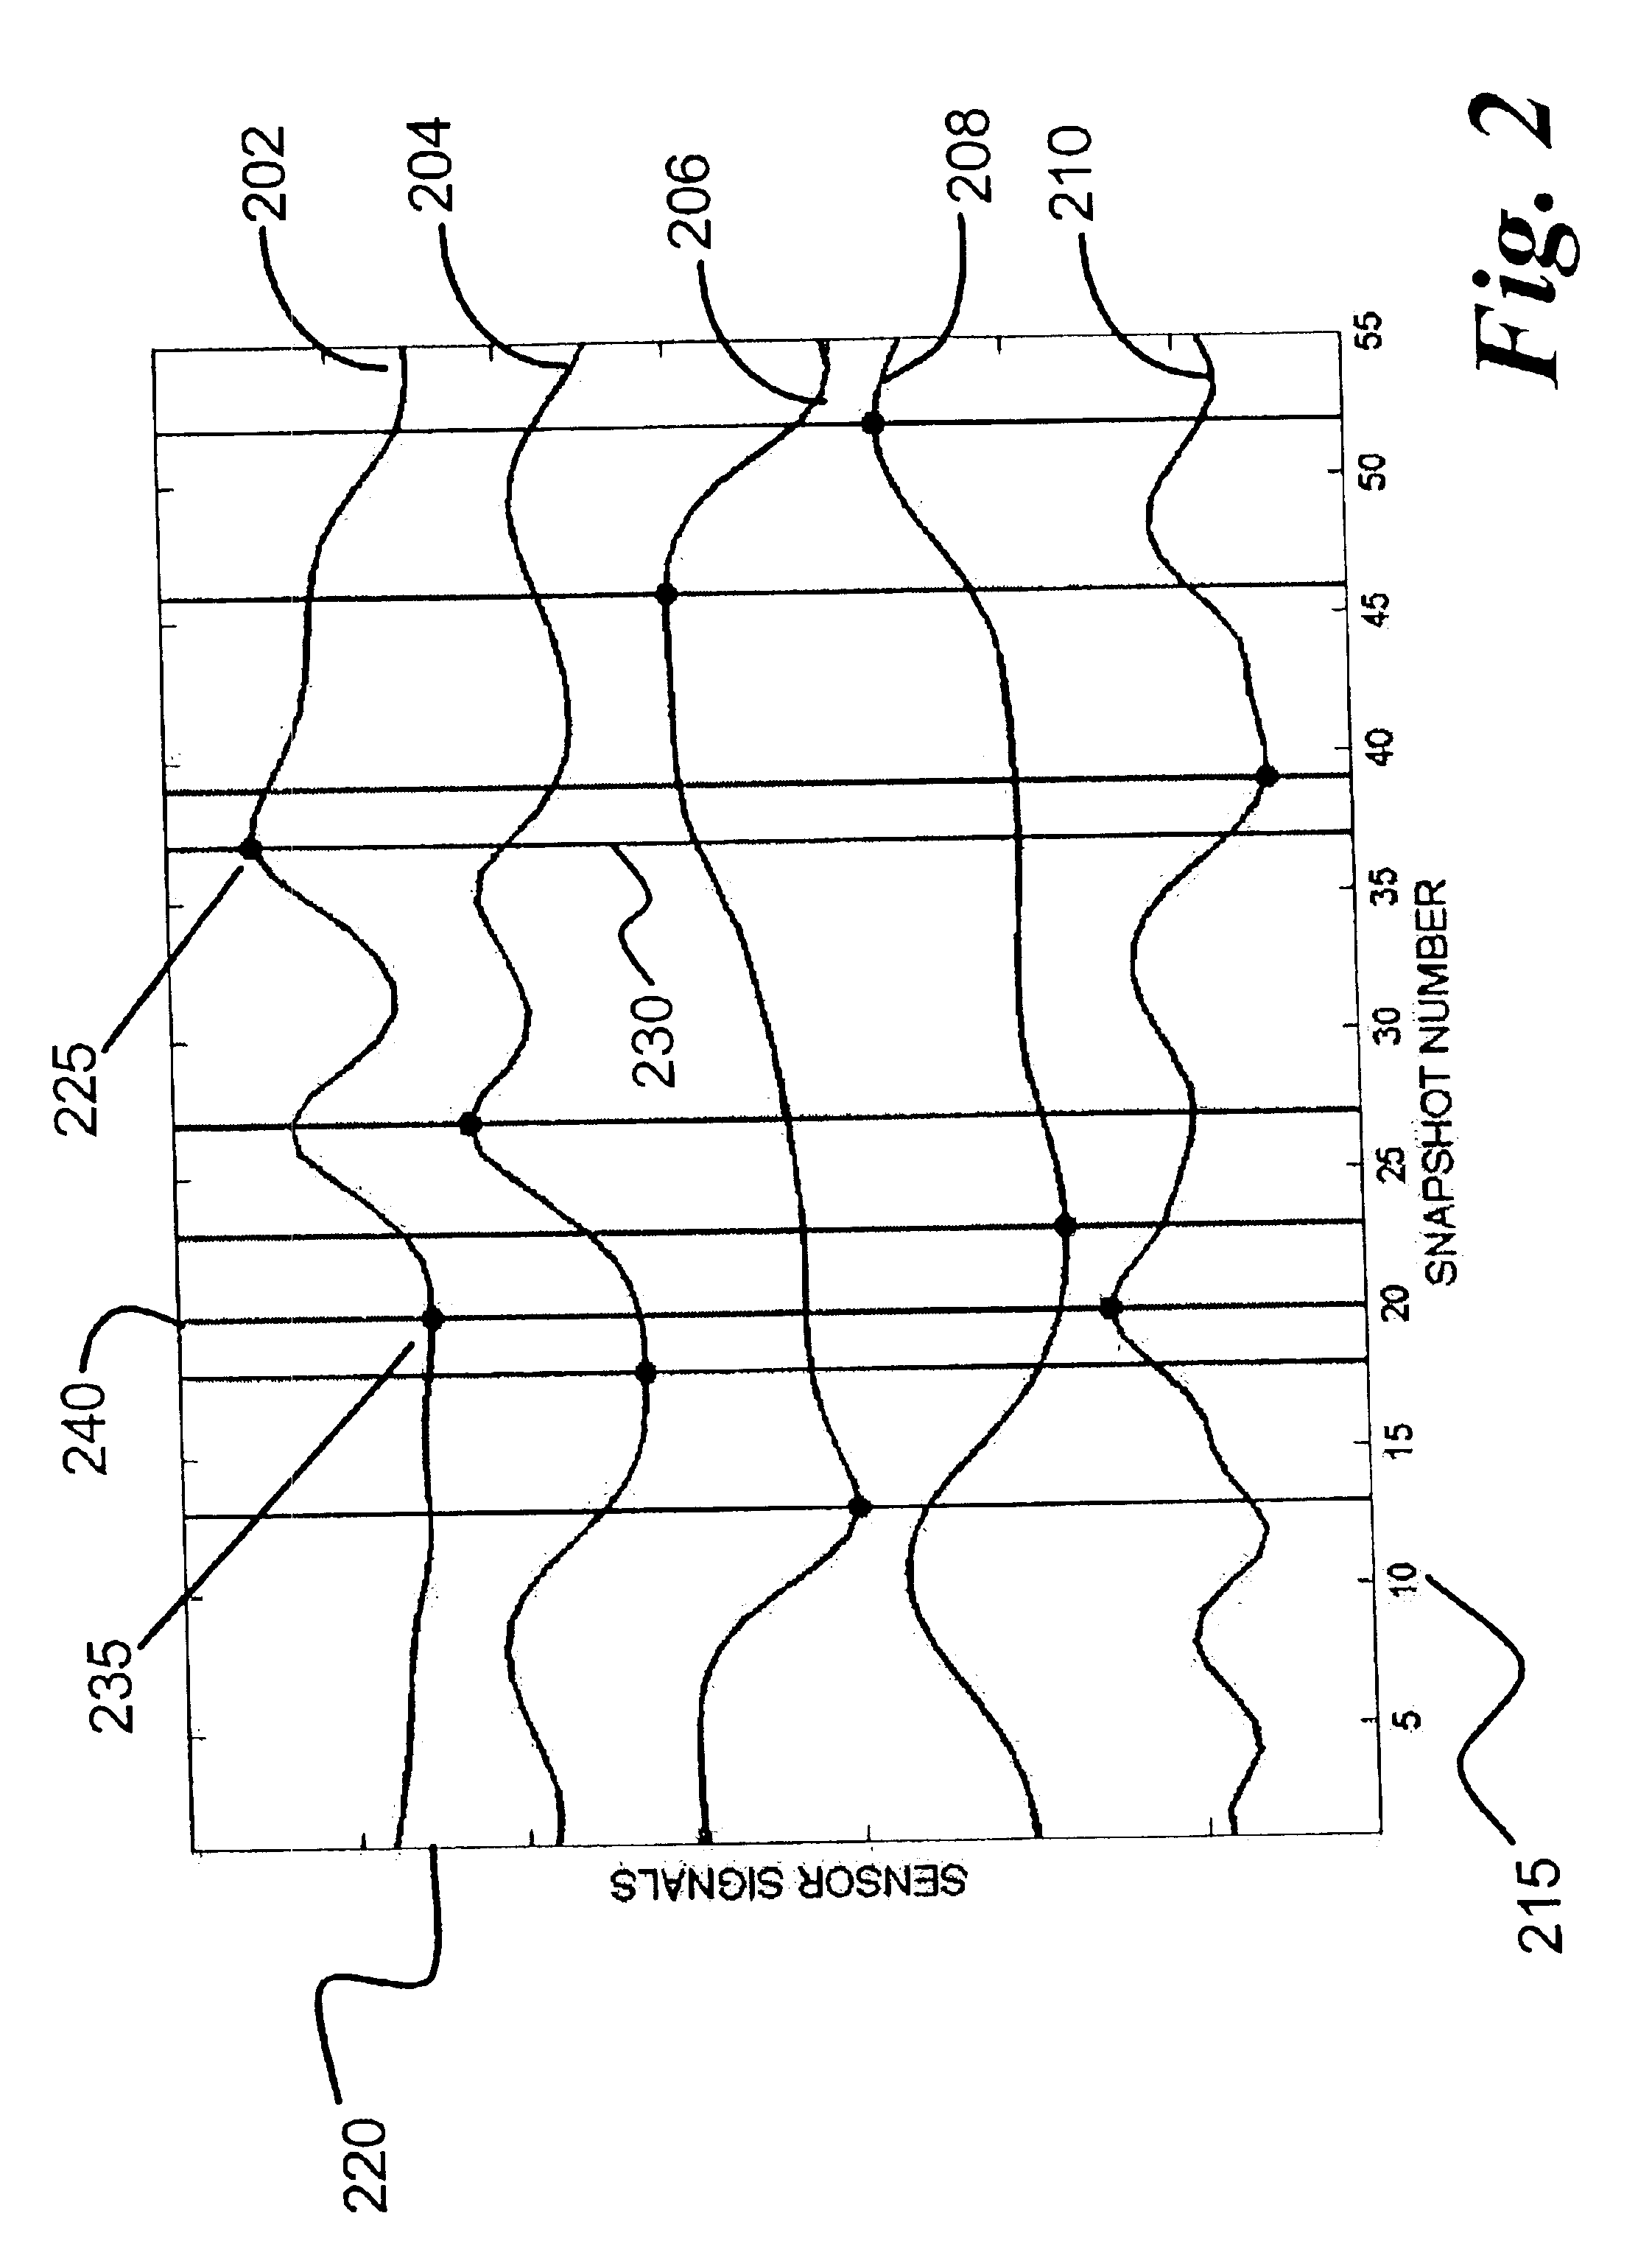 Inferential signal generator for instrumented equipment and processes